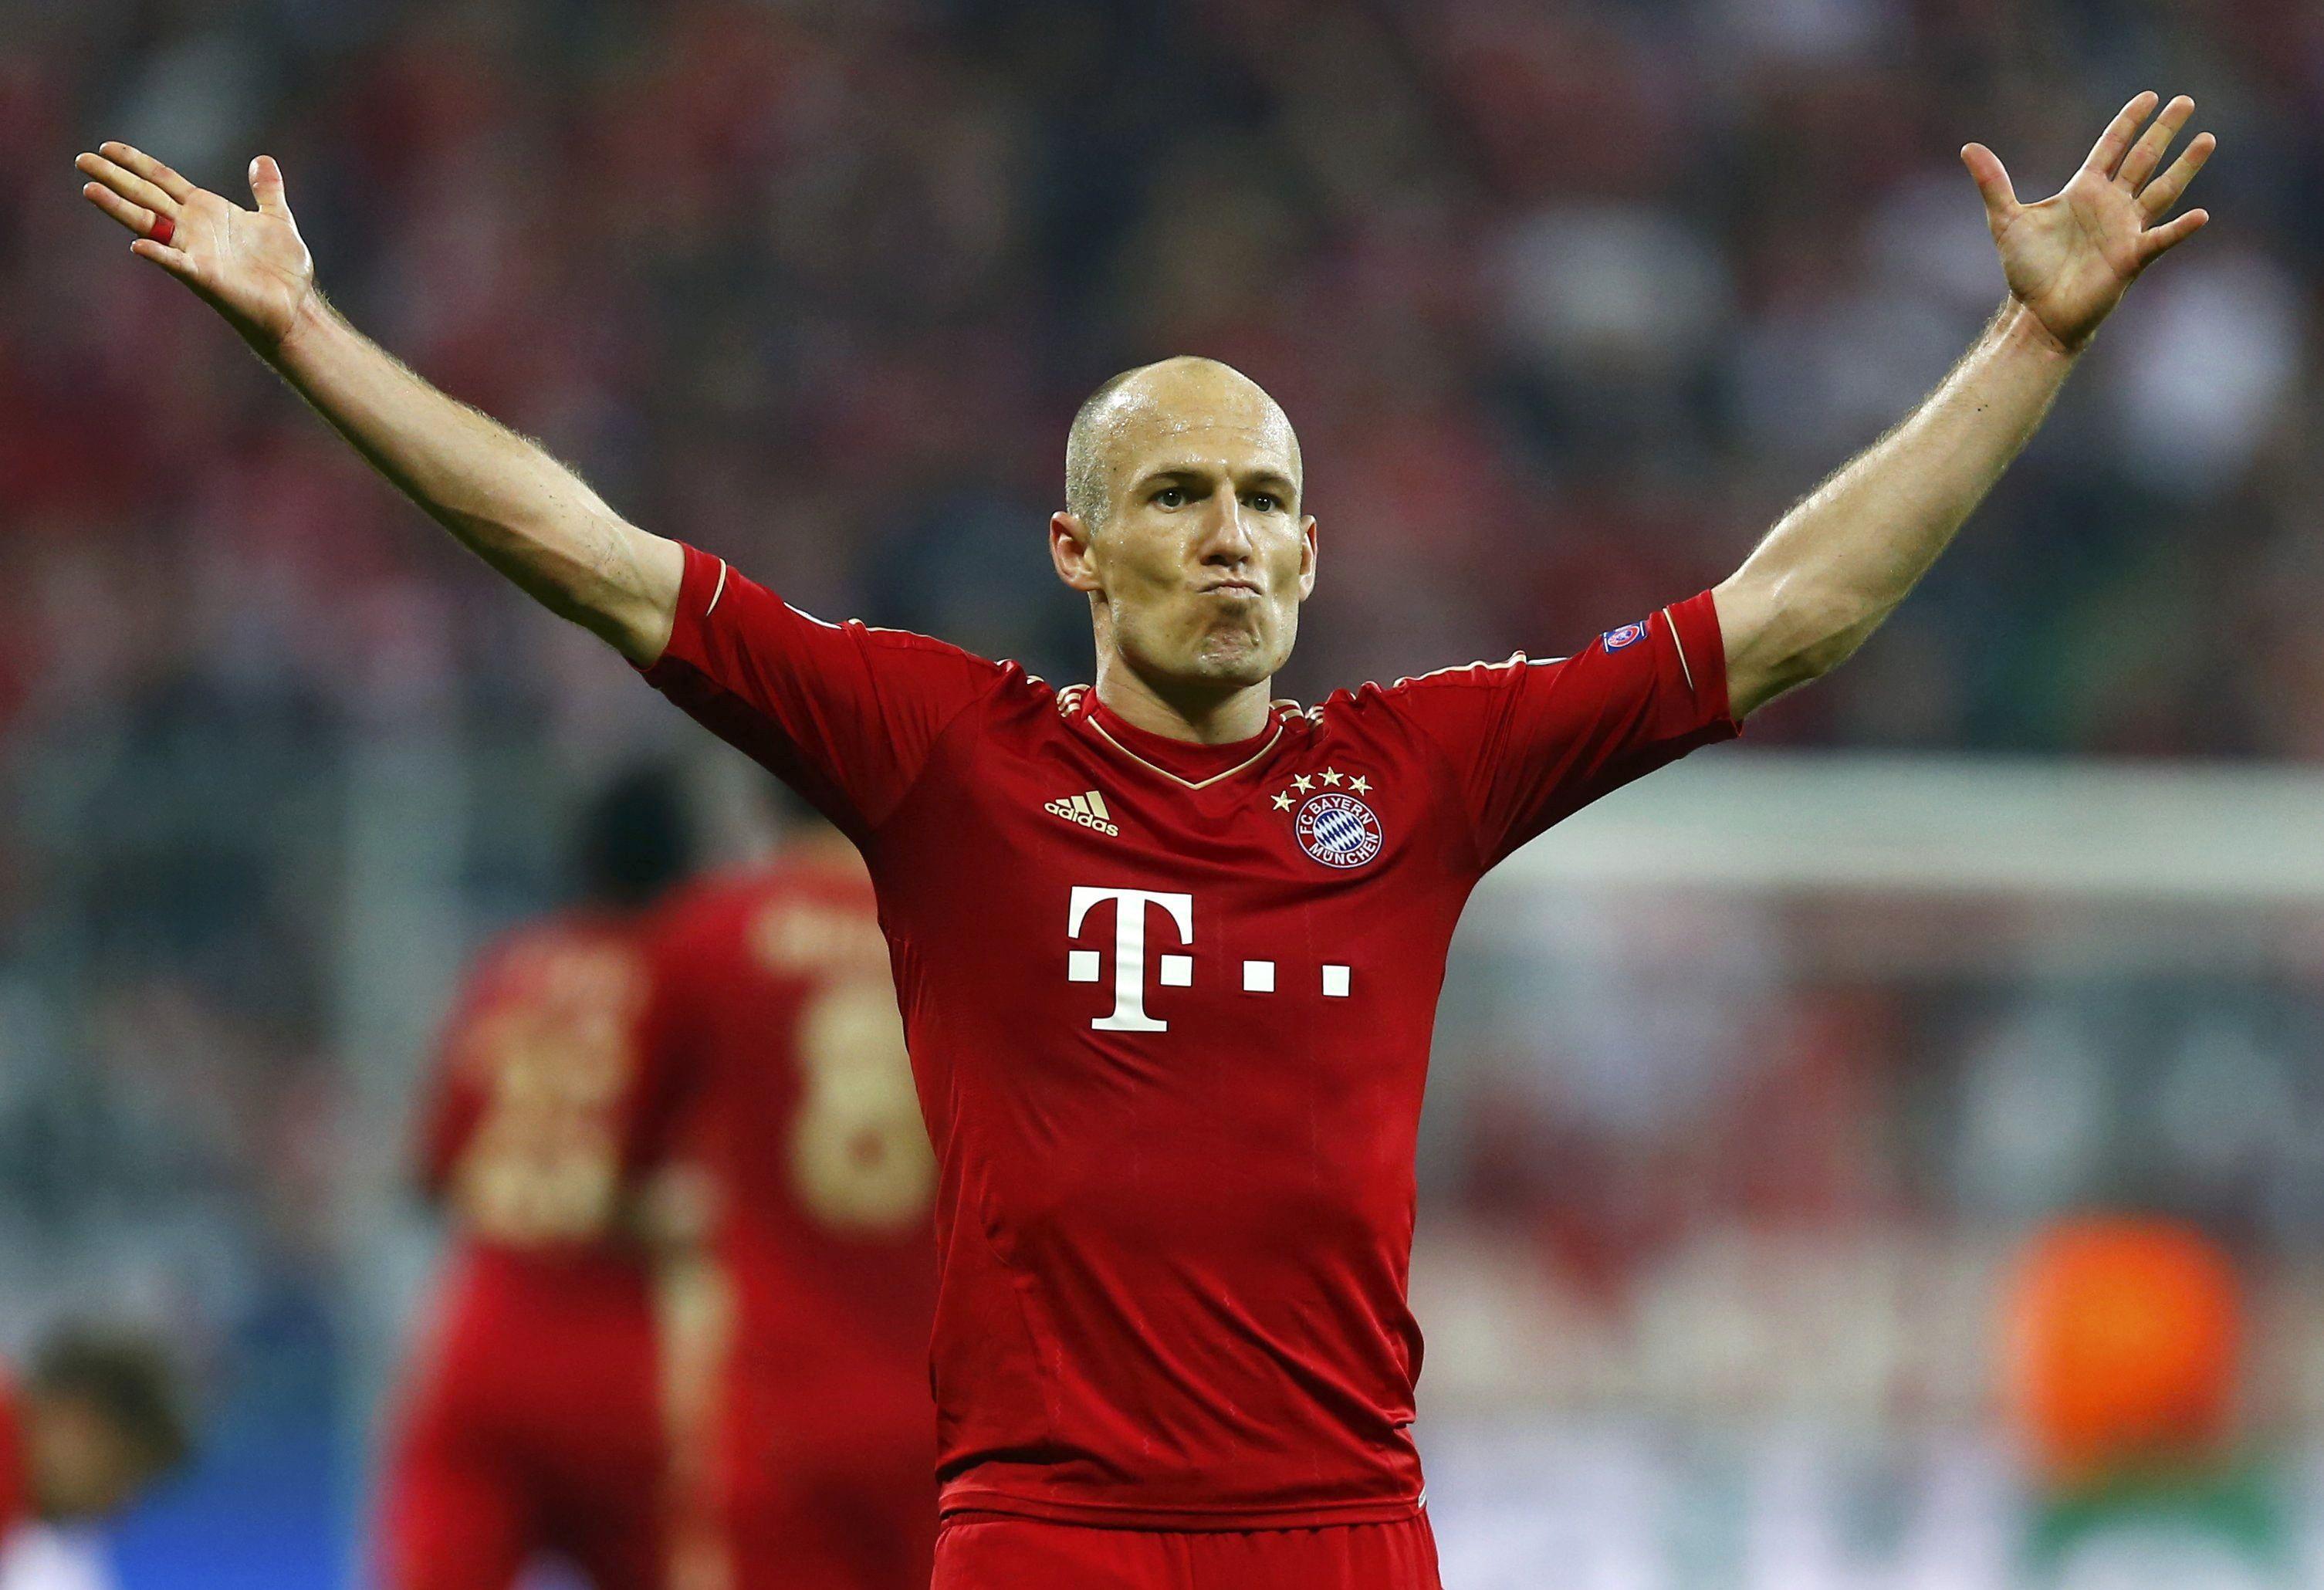 The best halfback of Bayern Arjen Robben wallpaper and image